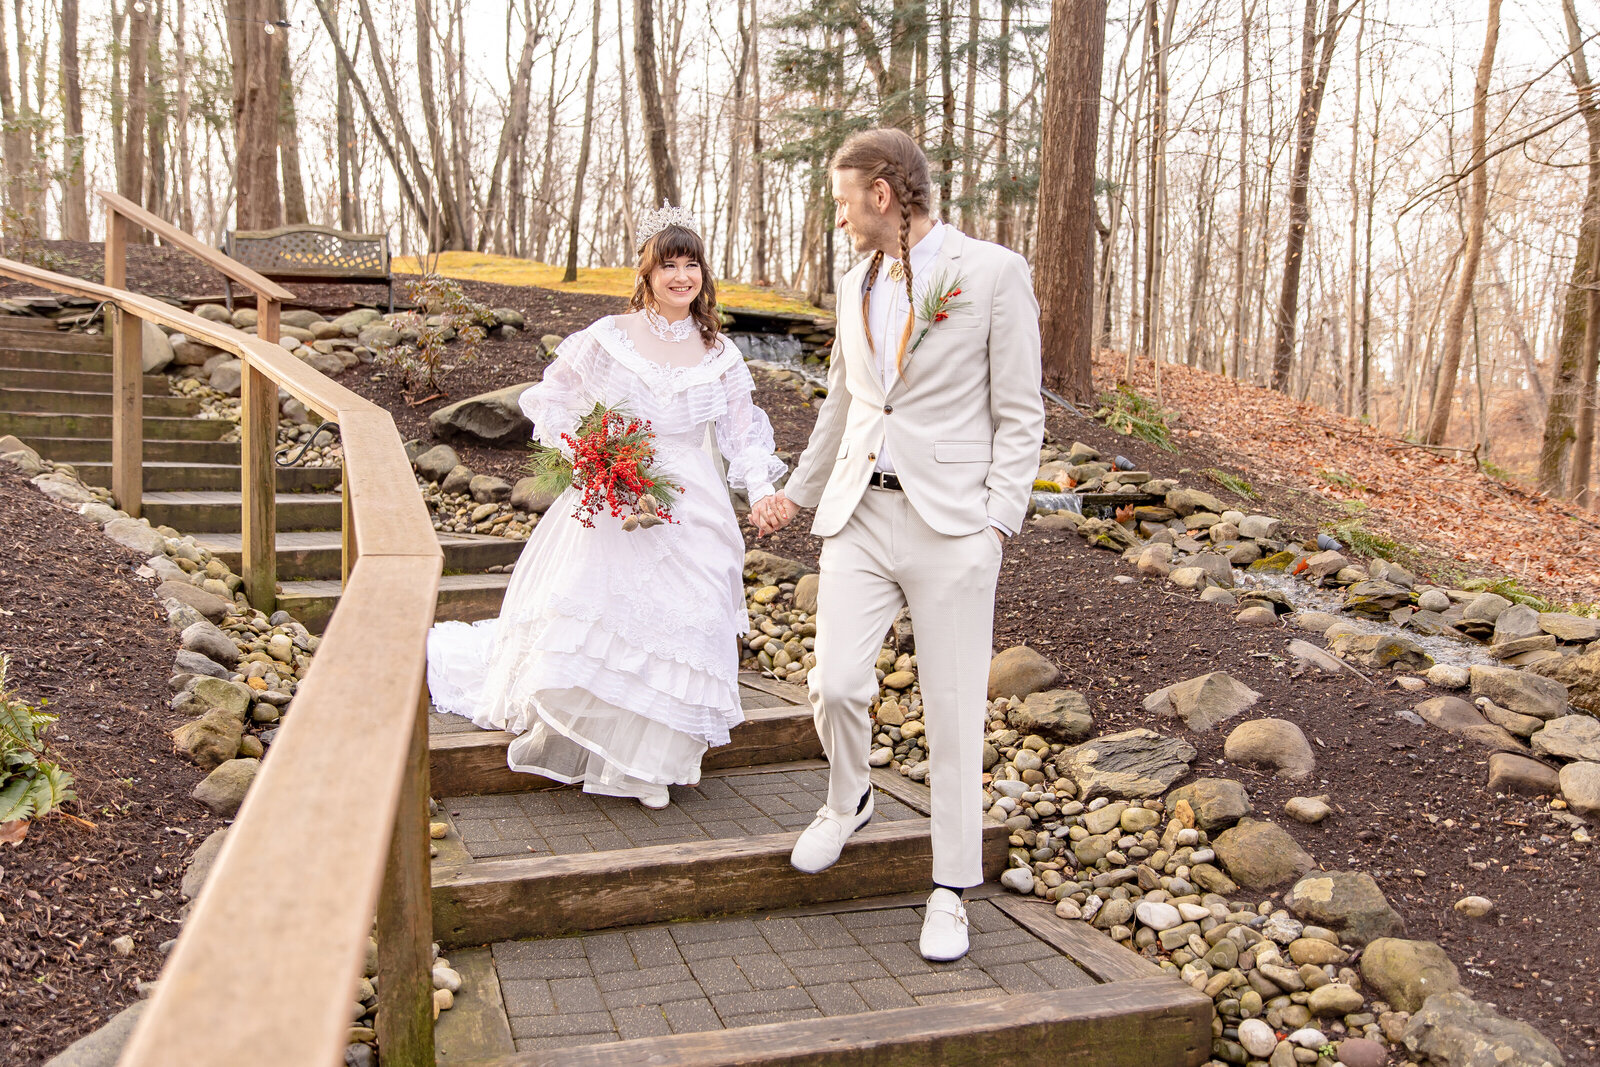 grooms escorting his bride down steps in forest